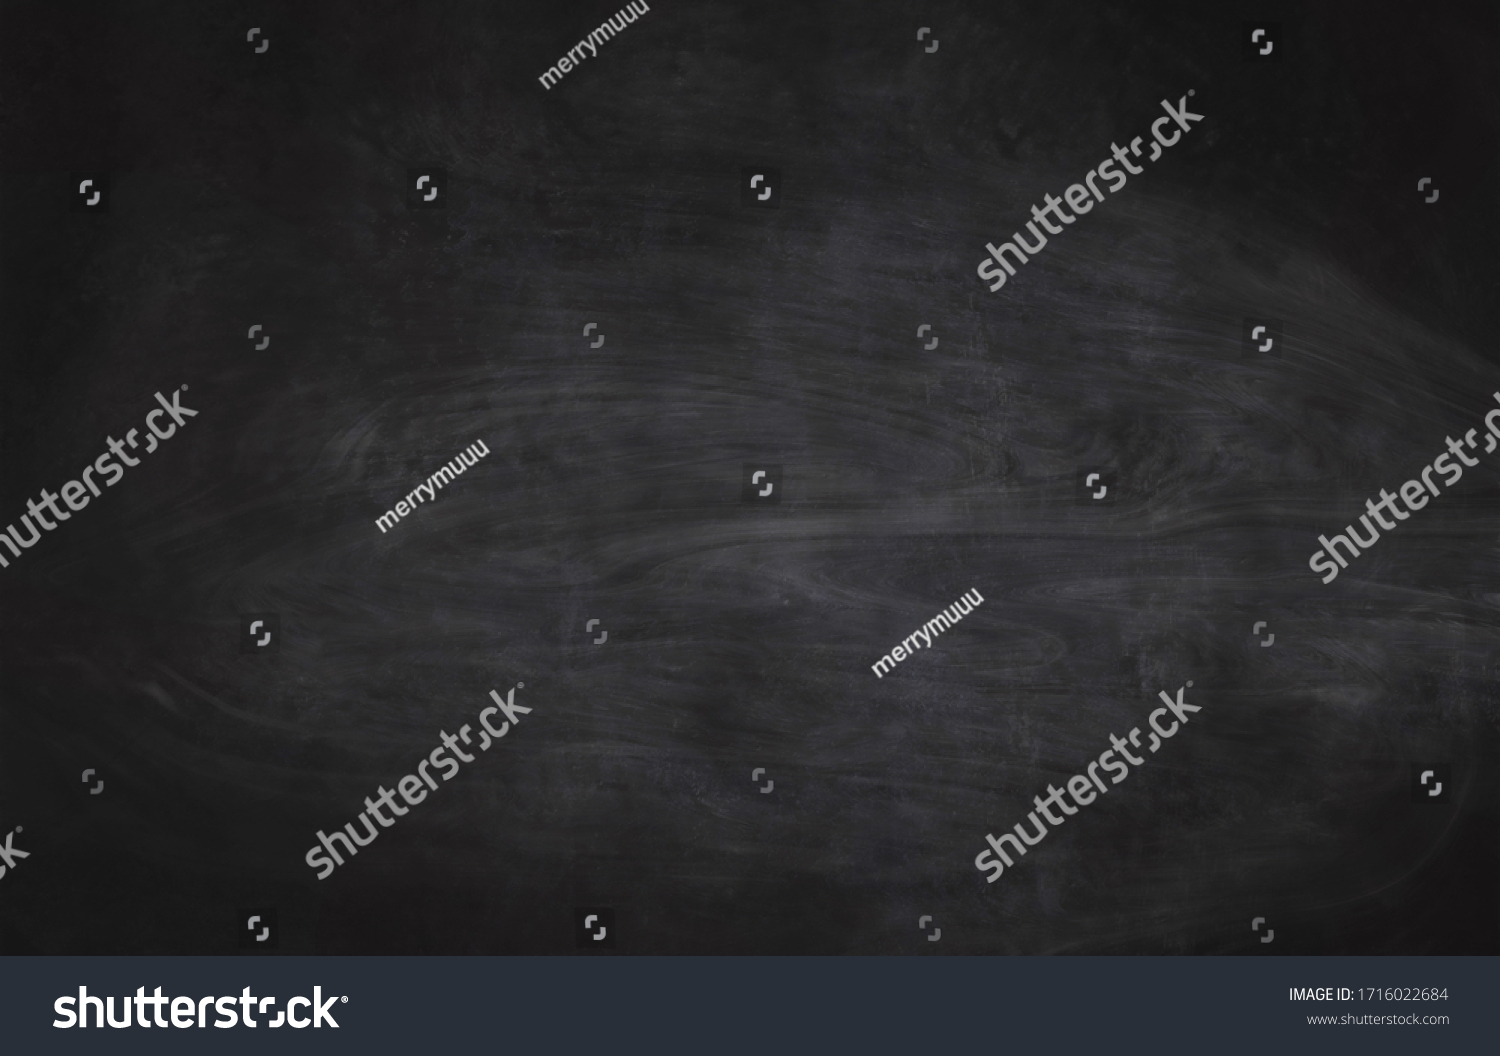 Chalkboard texture background with grunge dirt white chalk on blank black board billboard wall, copy space, element can use for wallpaper education communication backdrop
 #1716022684